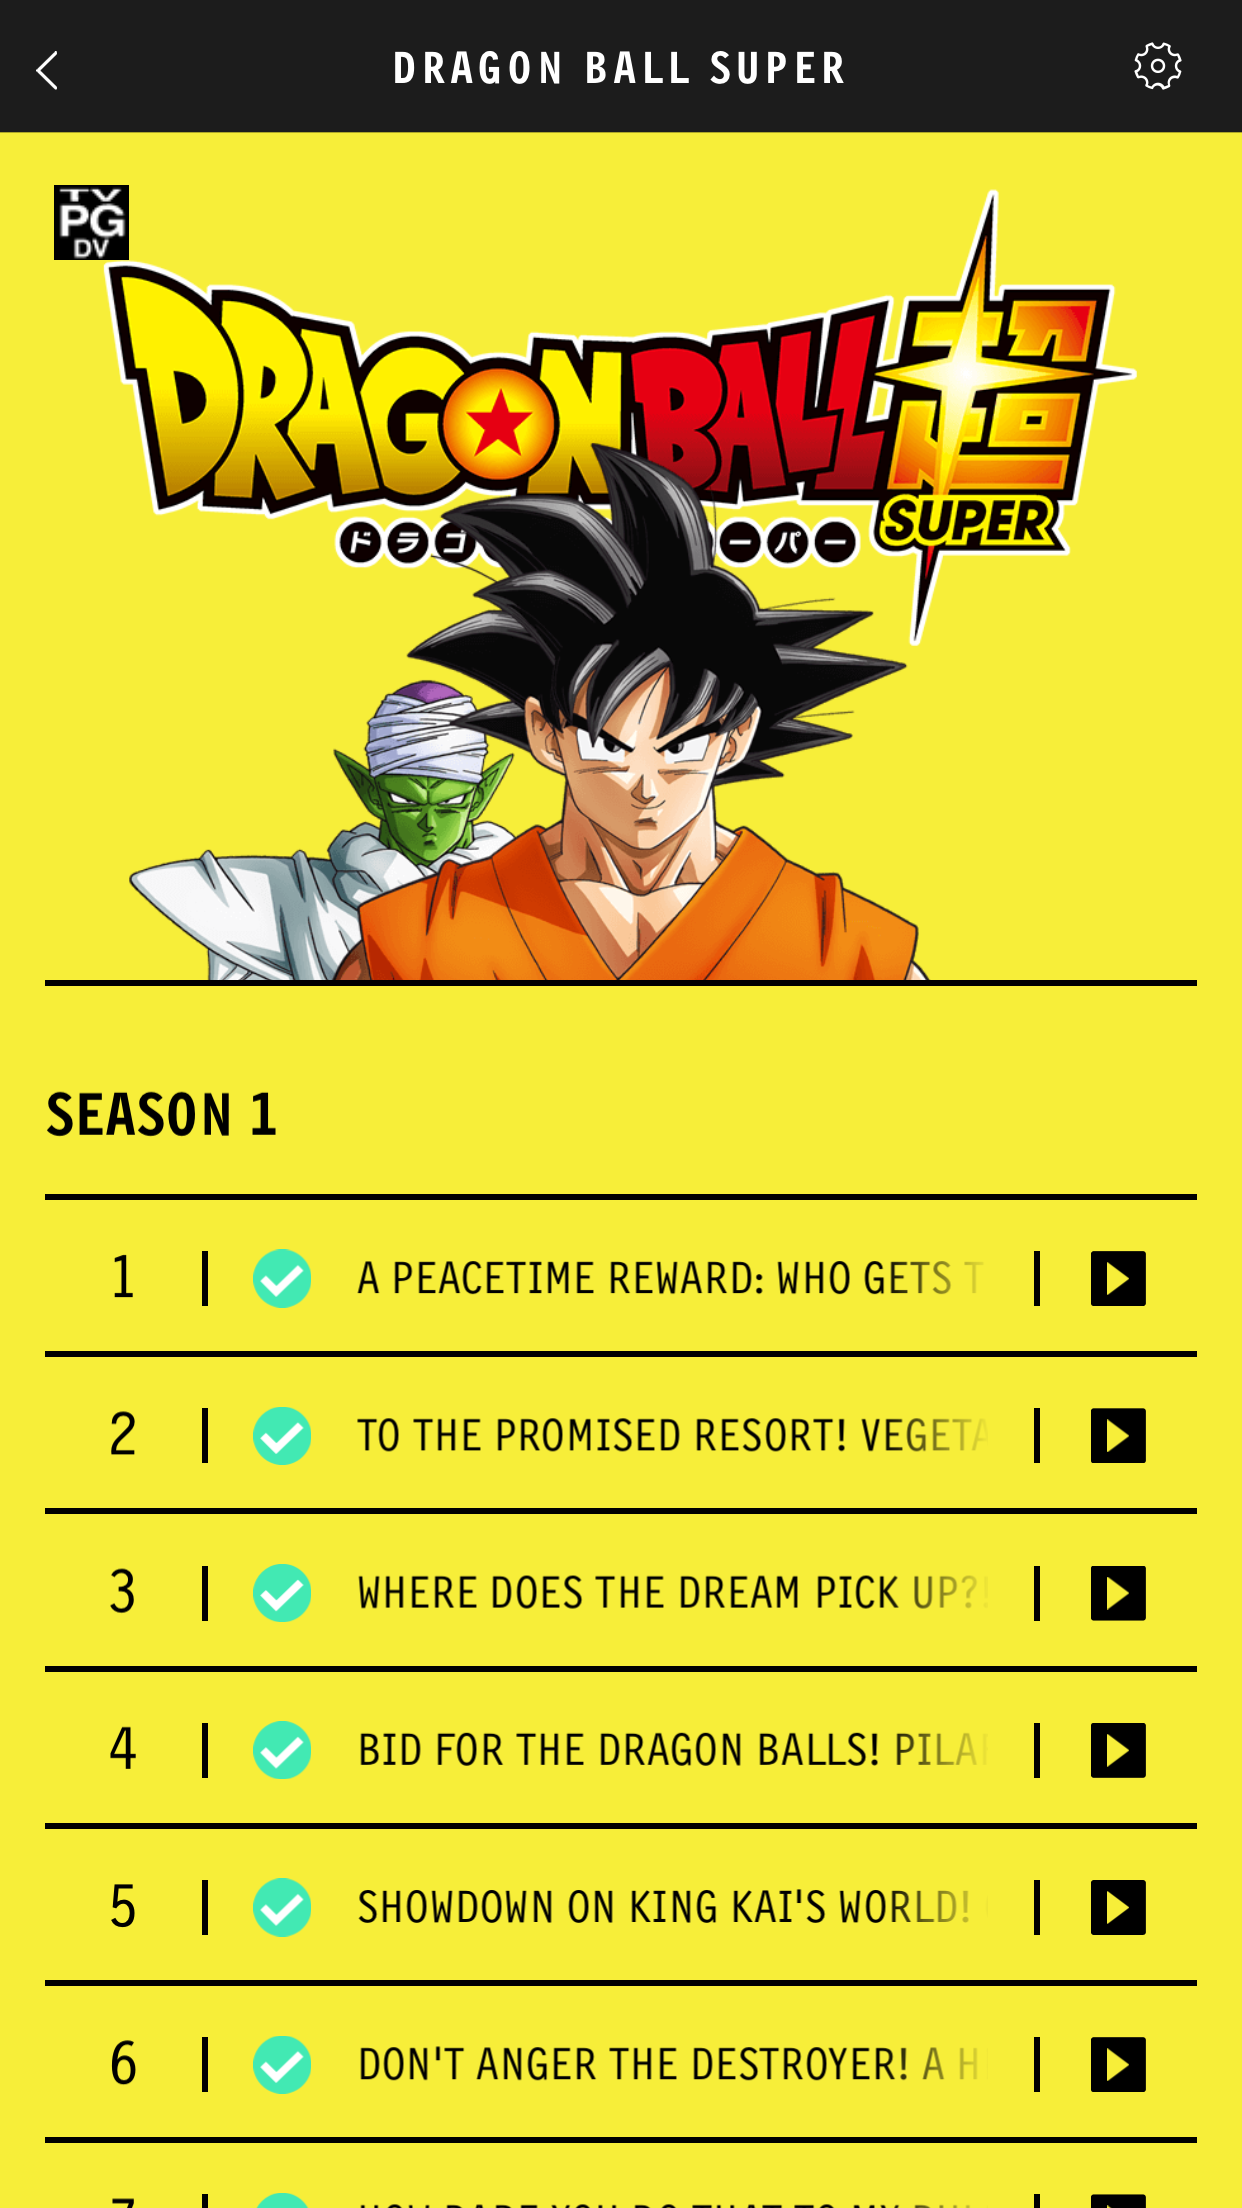 dragon ball super - Dragon Ball Super 006 looo Super Season 1 A Peacetime Reward Who Gets Id 2 To The Promised Resort! Veget Id 3 Where Does The Dream Pick Up Id 4 Bid For The Dragon Ballsi Pilaid 5 Showdown On King Kai'S World 6 Don'T Anger The Destroyer